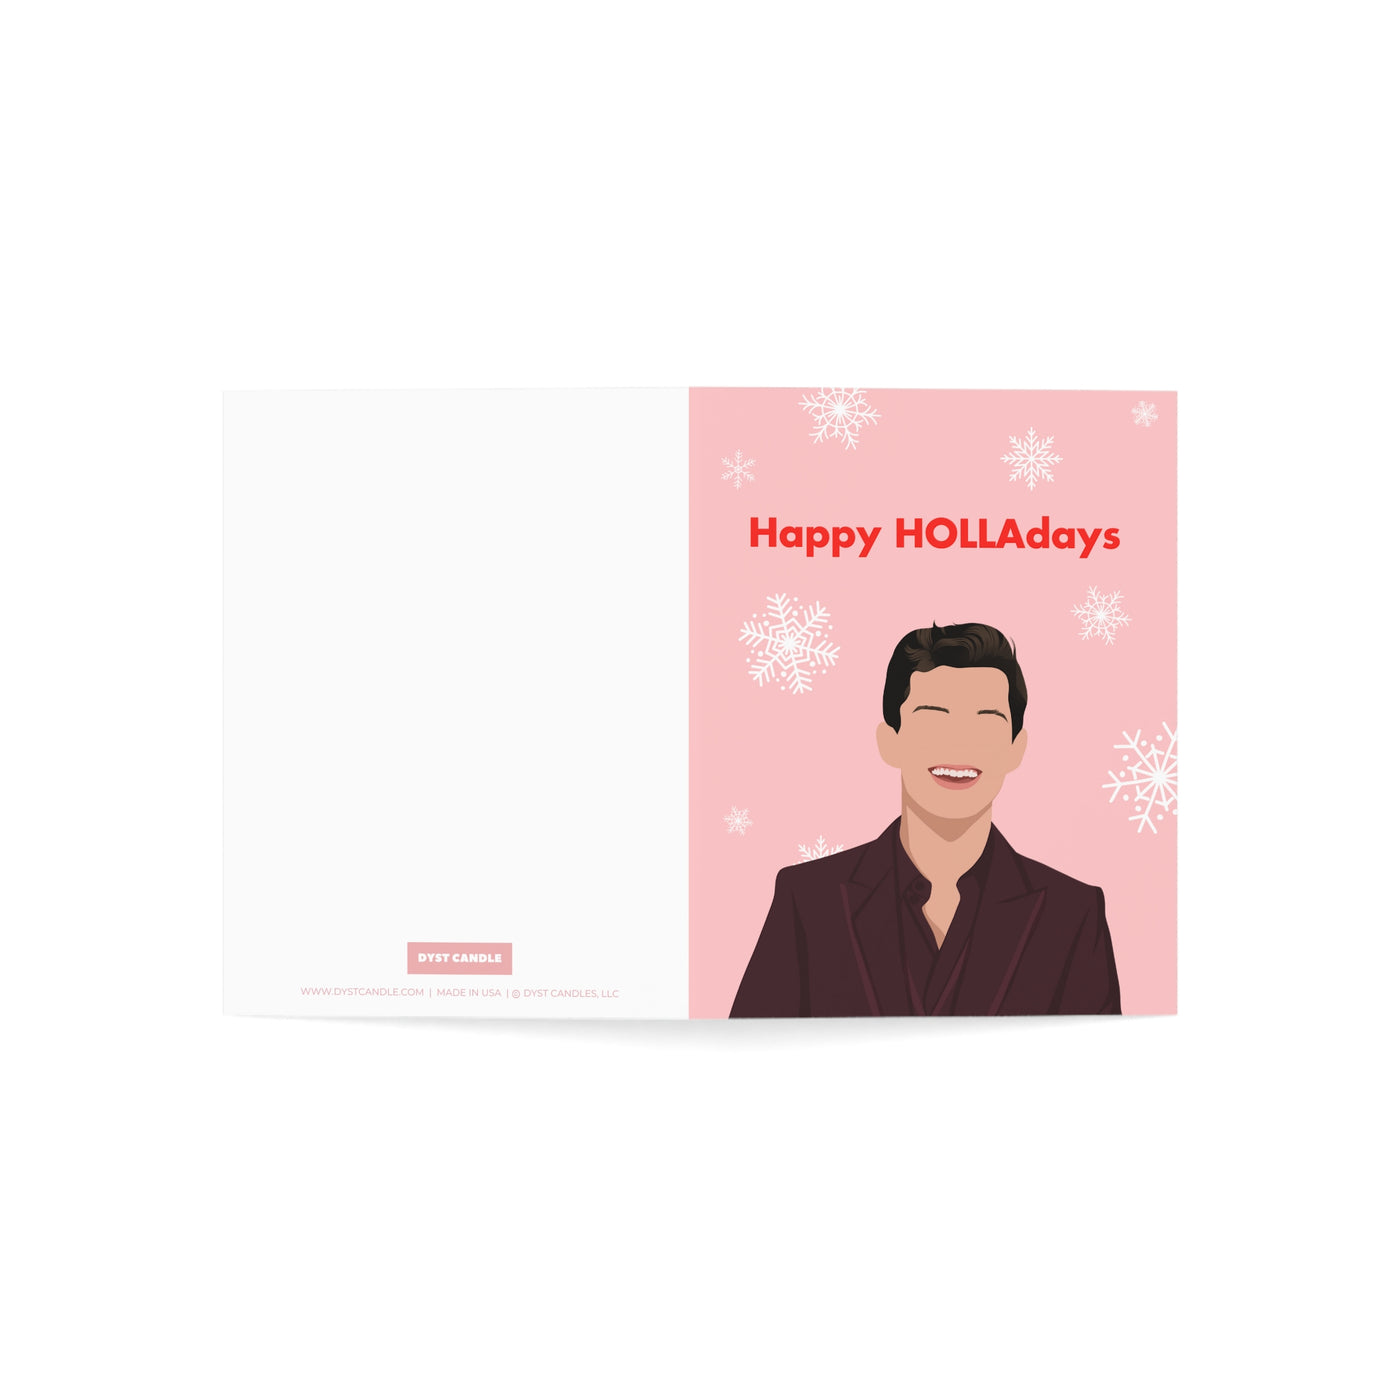 The Holland - Holladay's Holiday Greeting Card